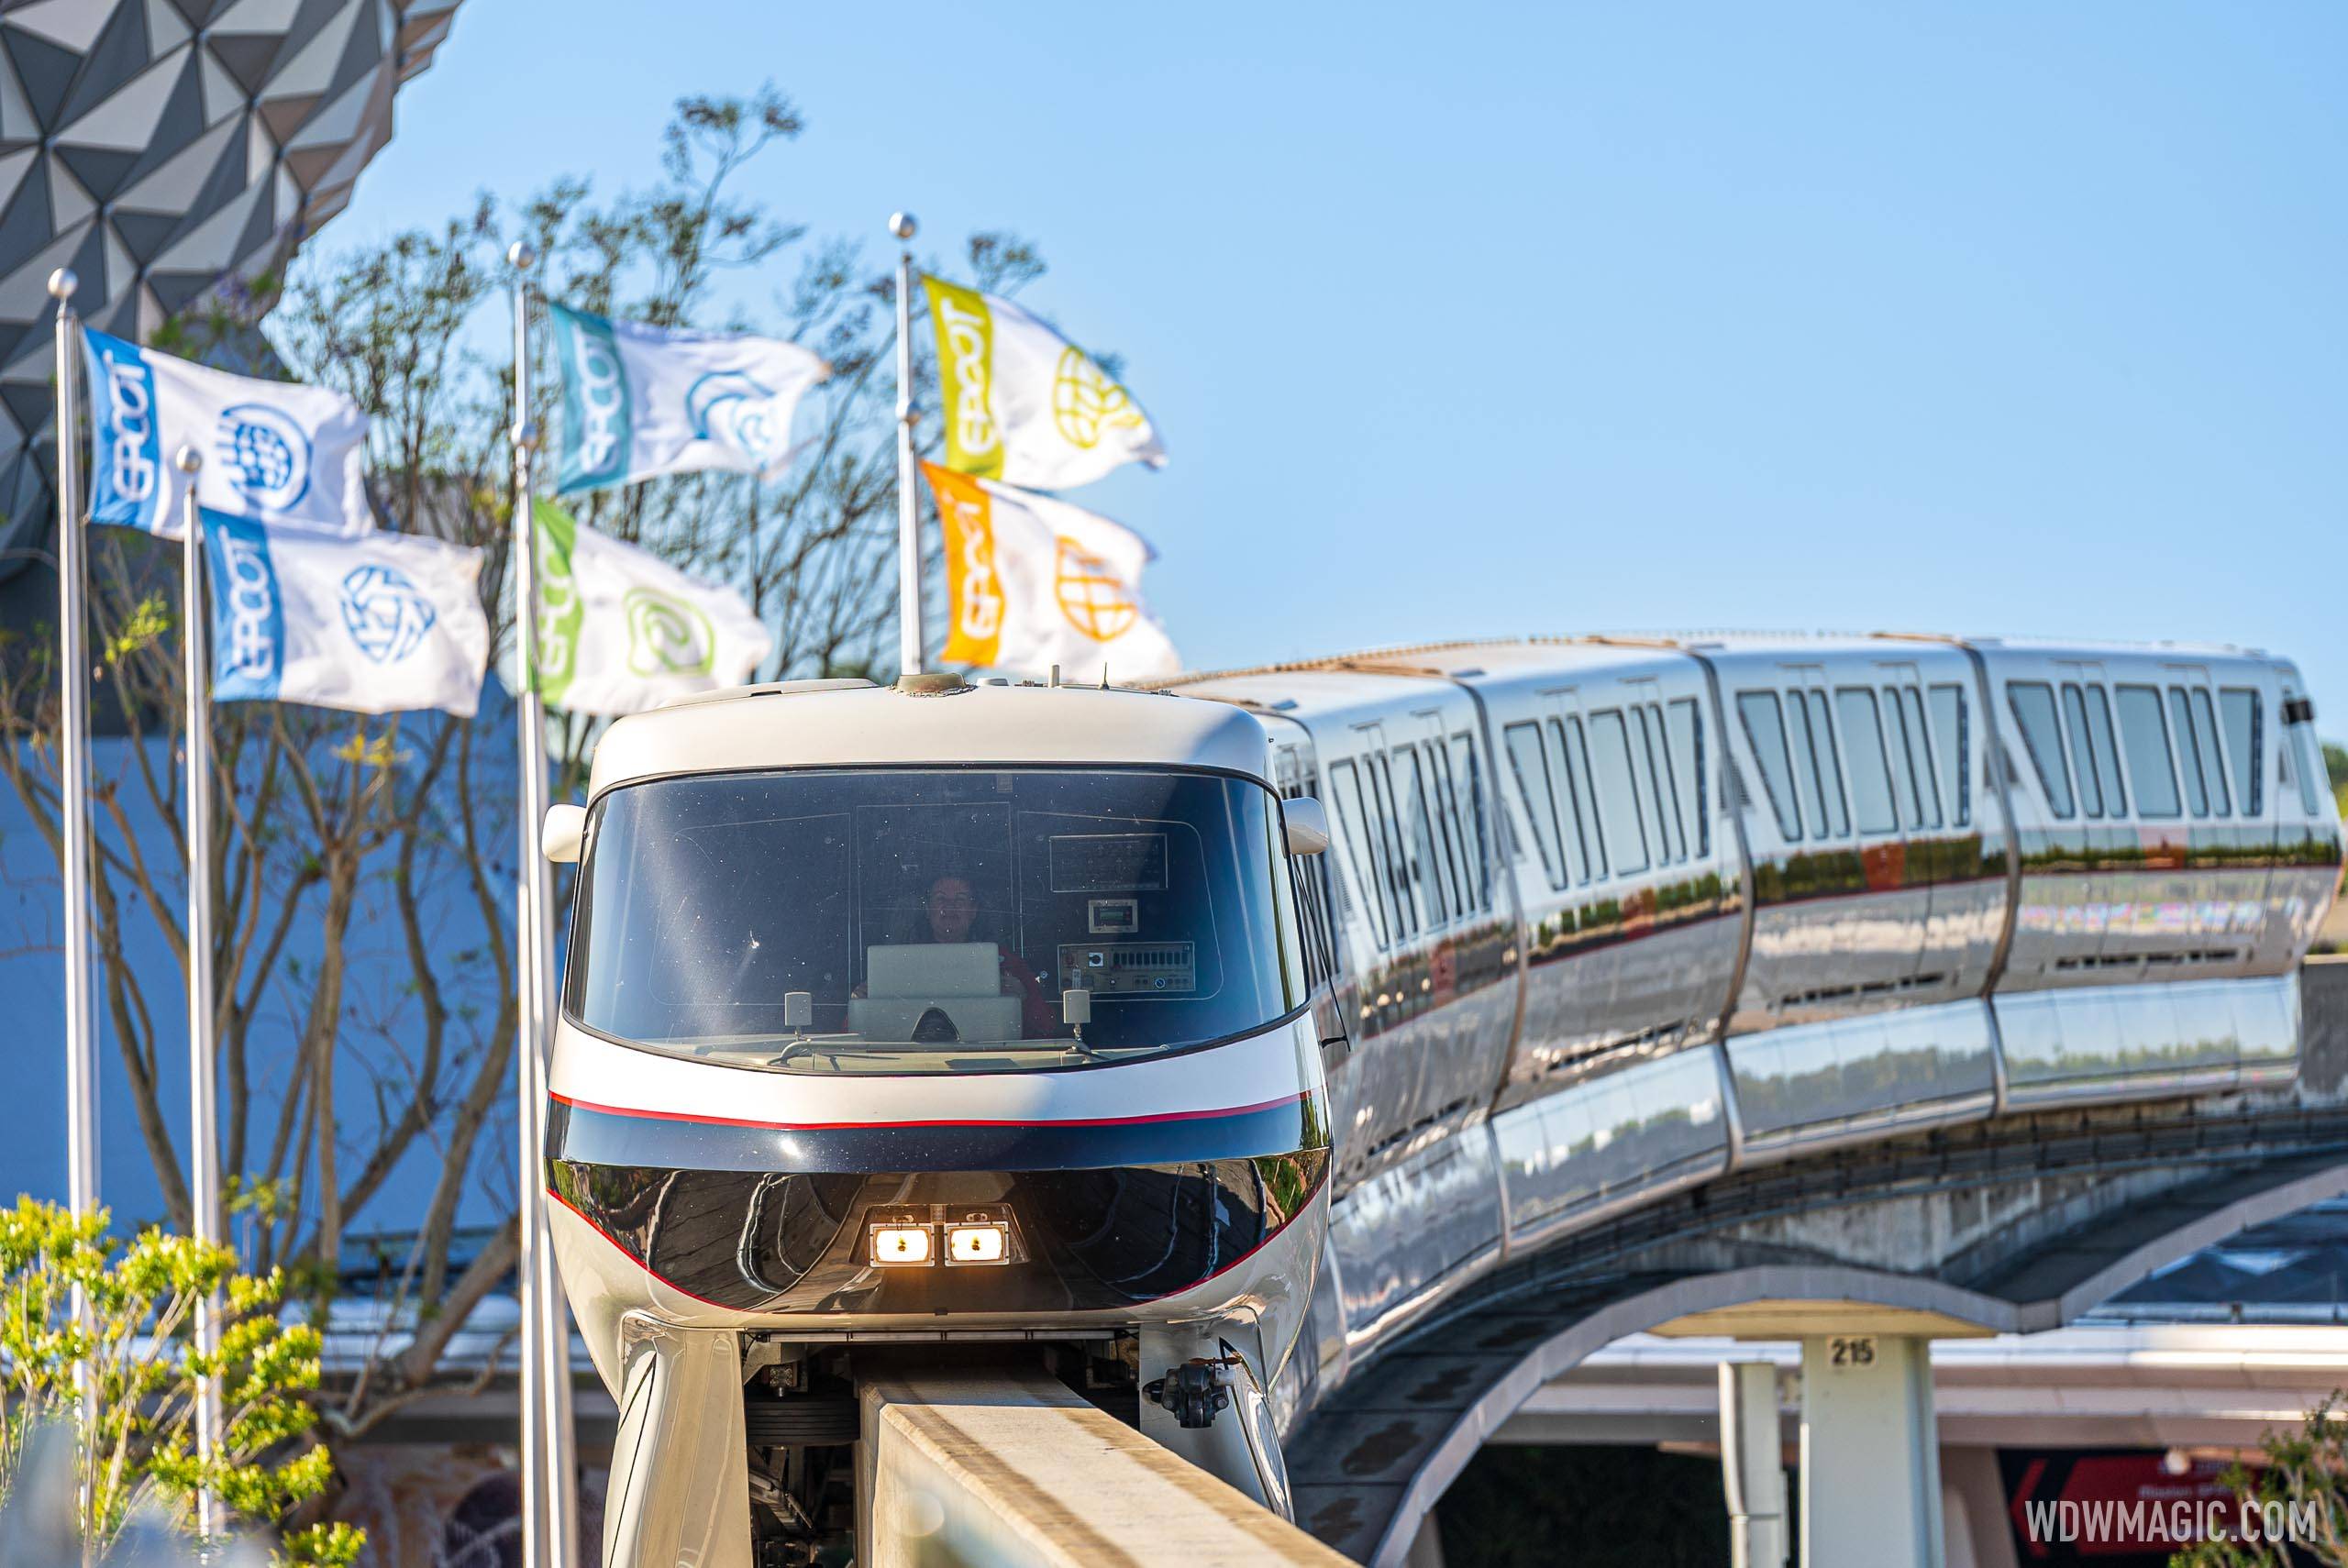 New monorail handrail configuration trial